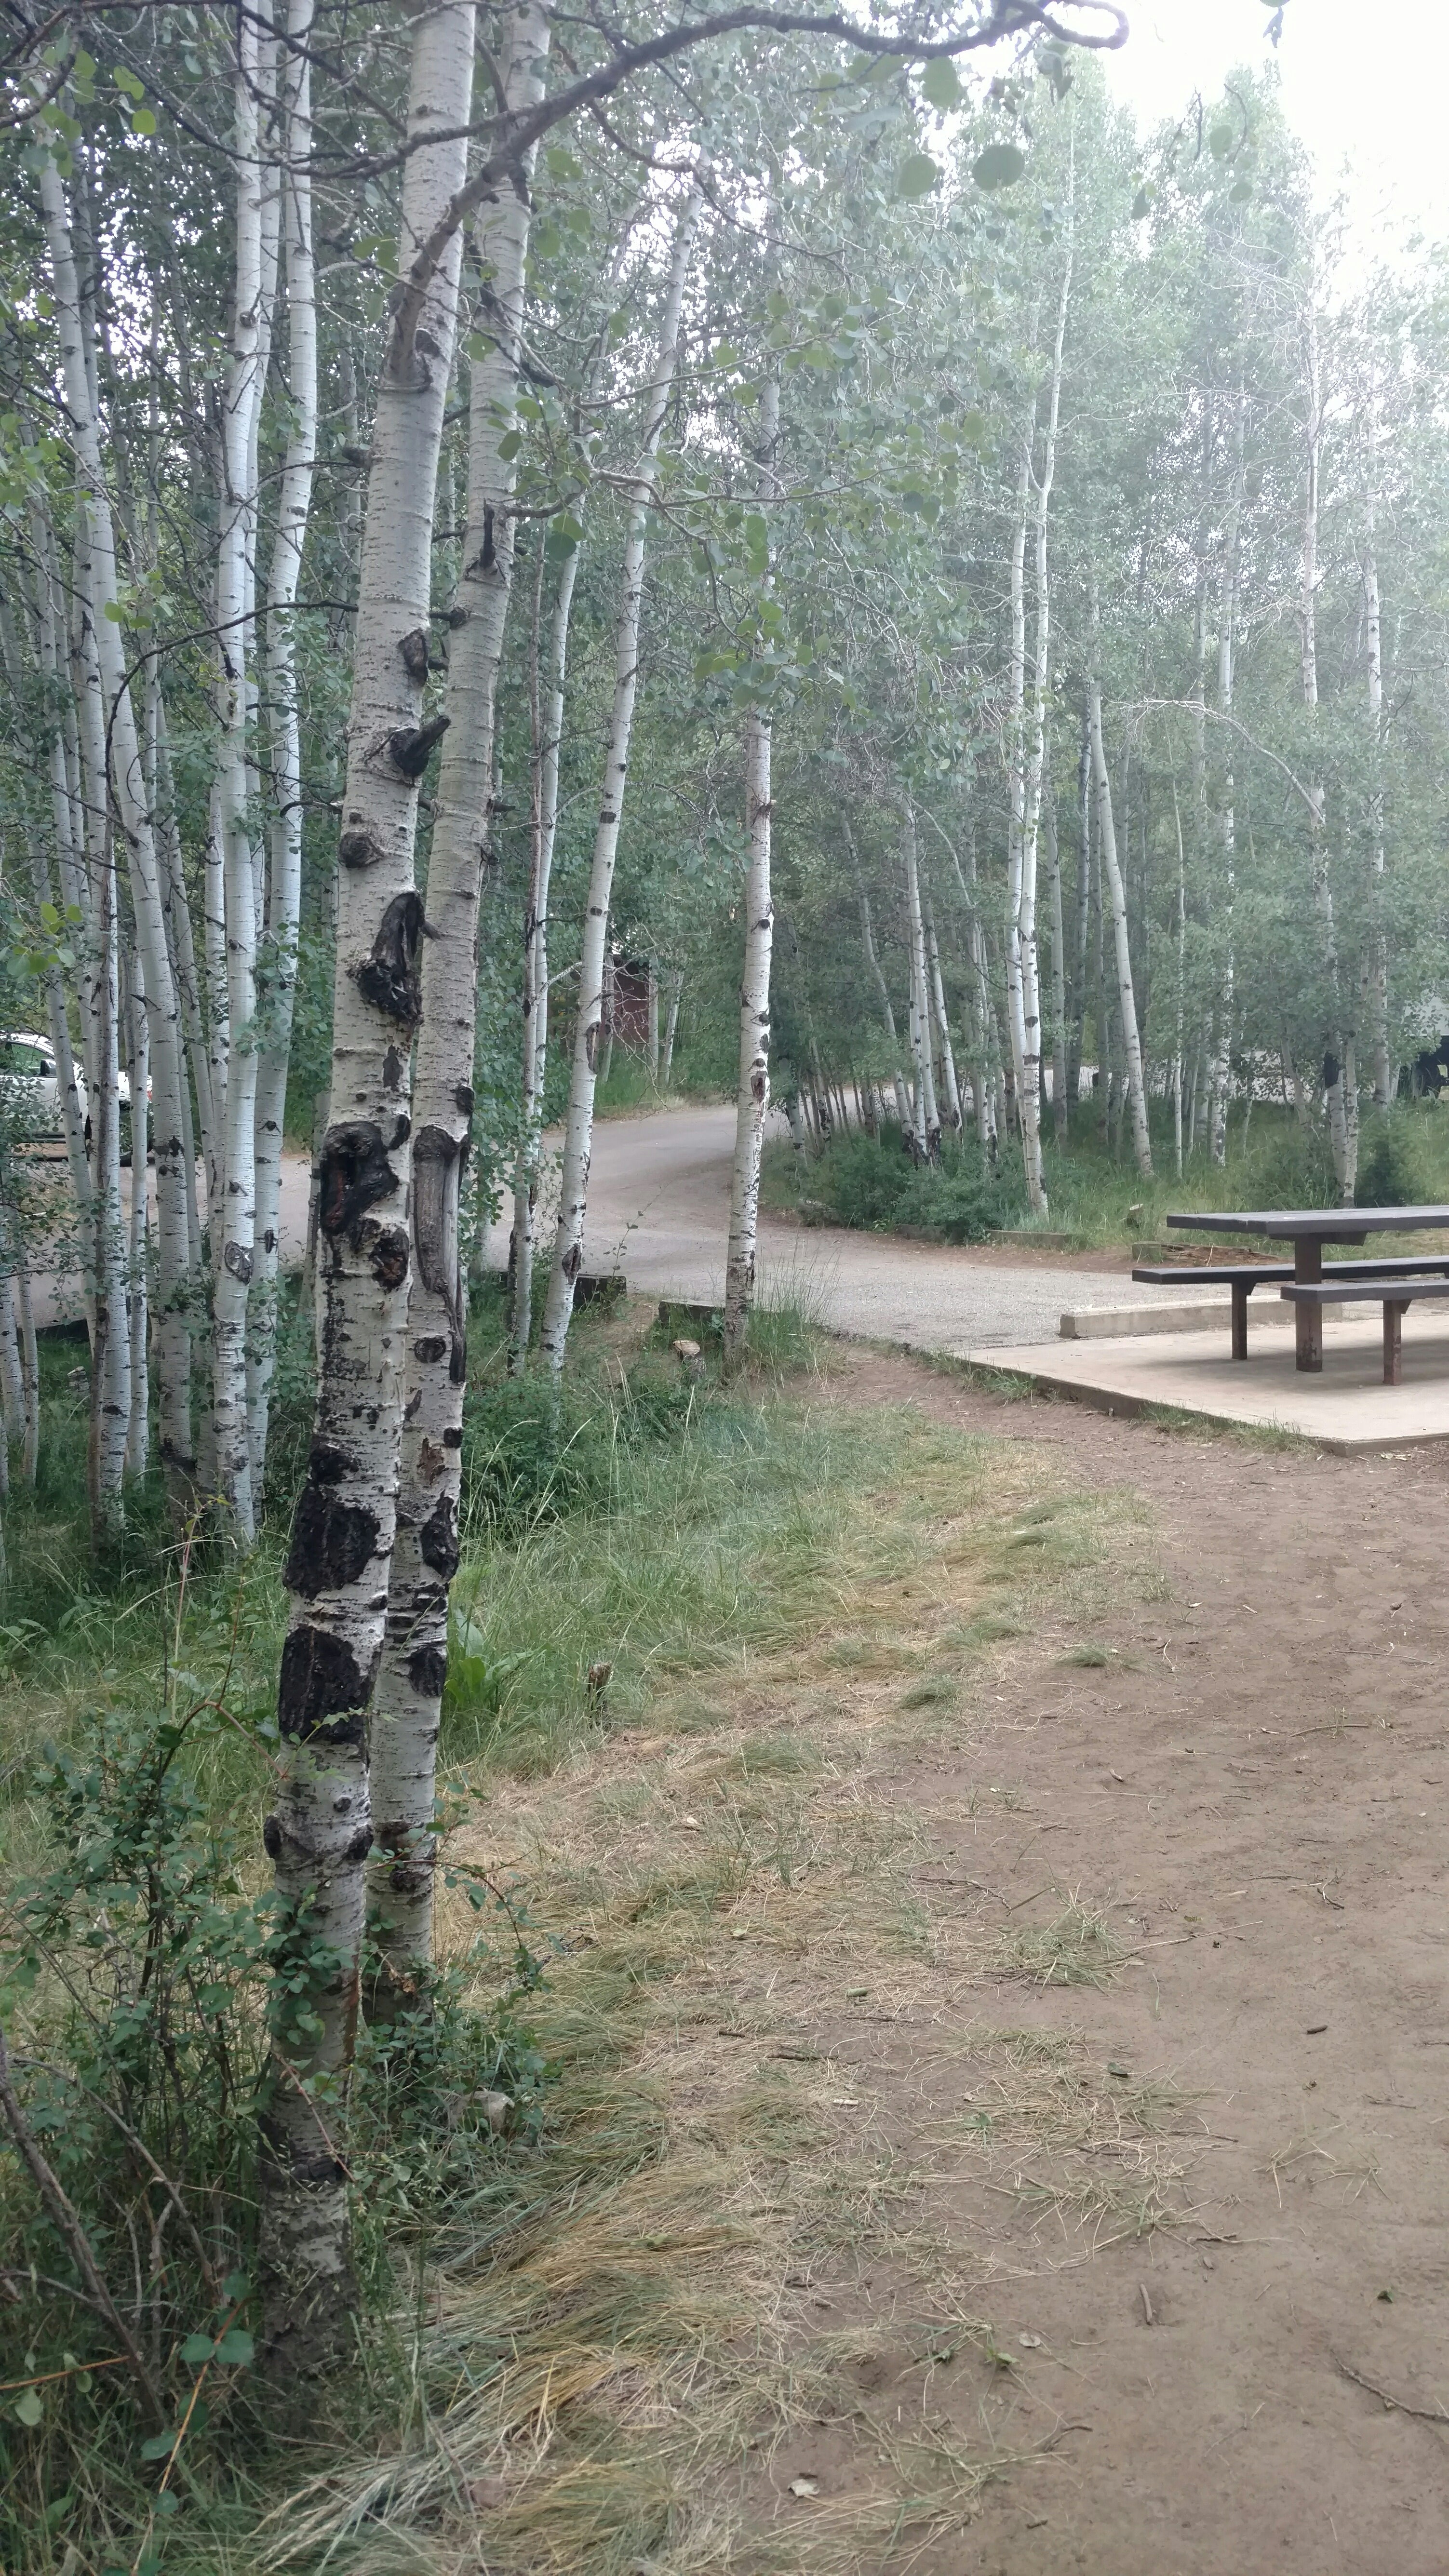 Camper submitted image from Aspen Grove (uinta-wasatch-cache National Forest, Ut) - 1